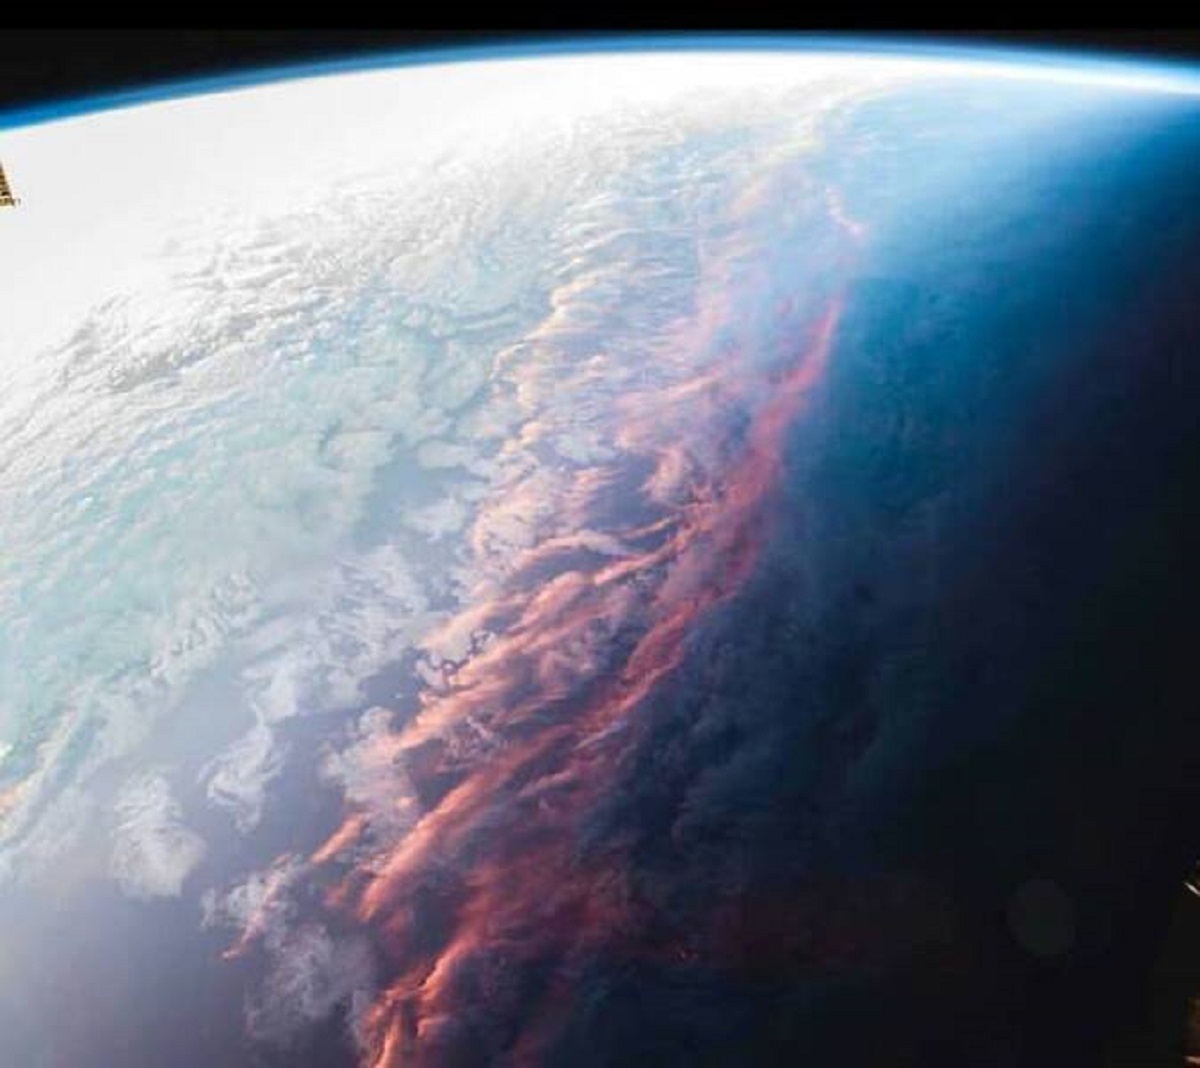 This is what a sunset looks like from space: